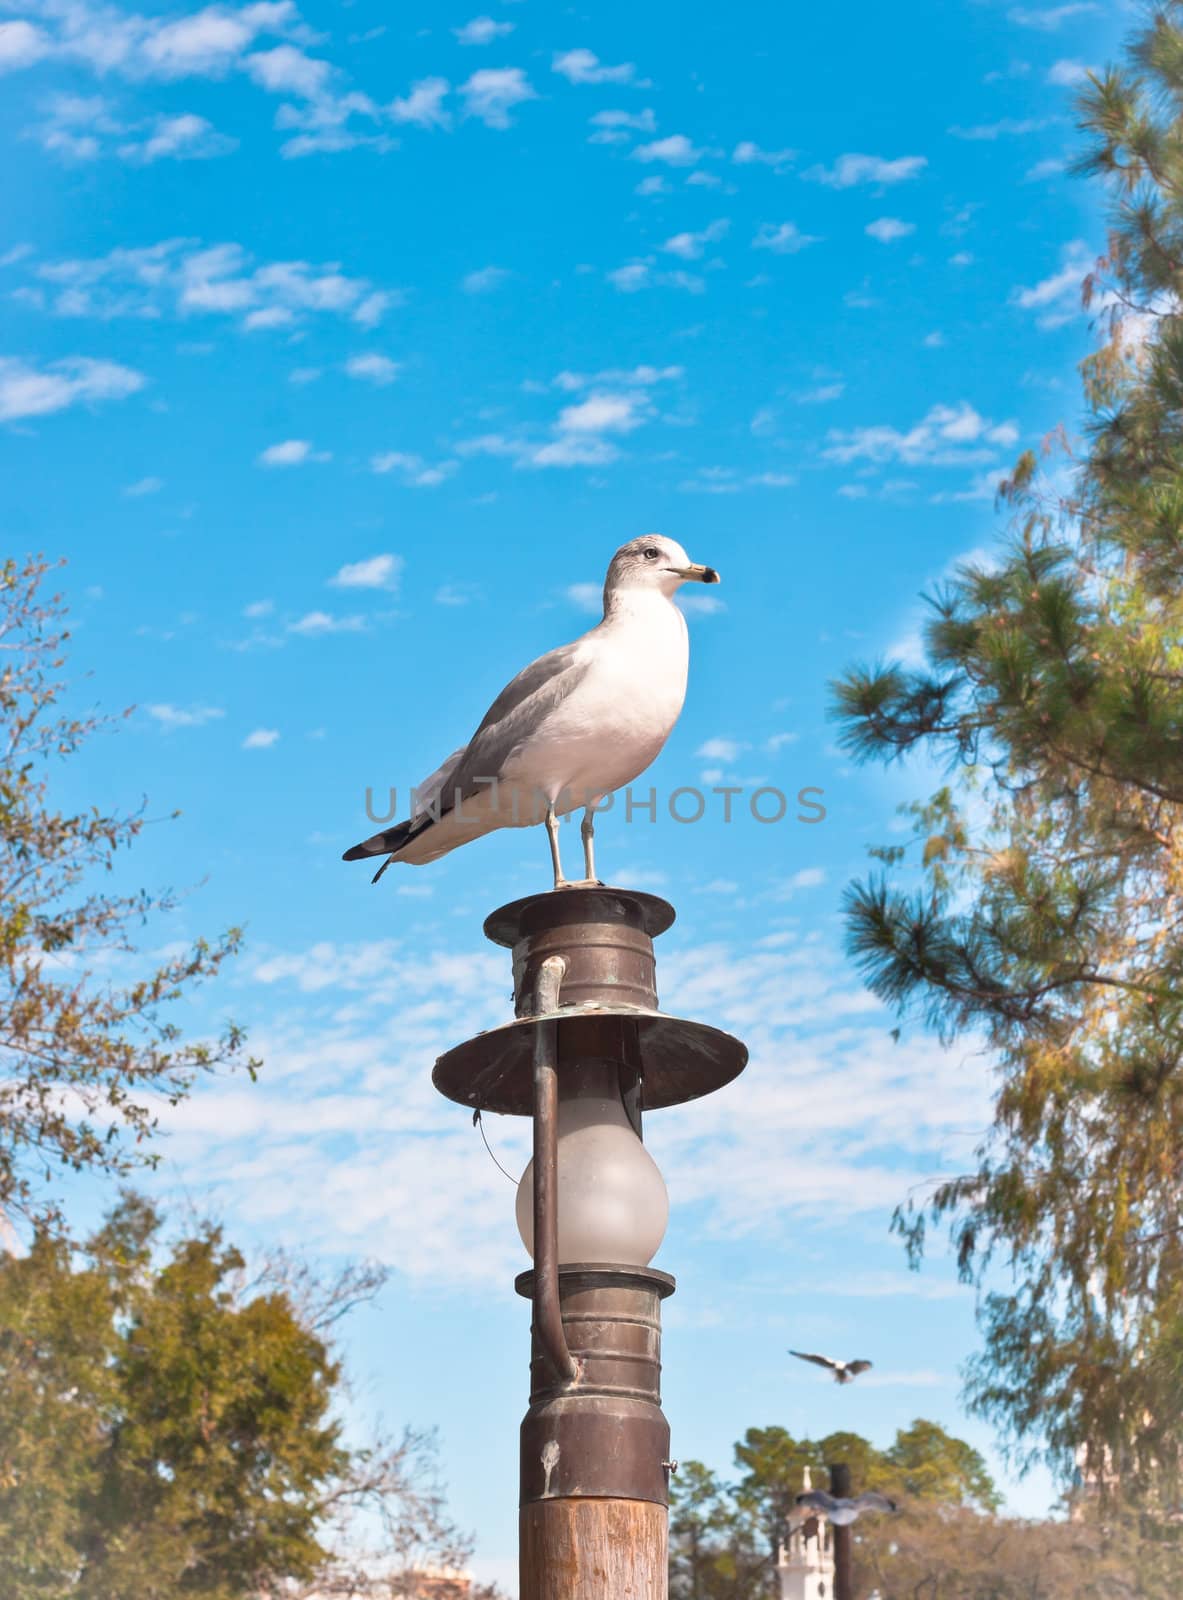 A seasgull sitting on a lamp post against a blue sky